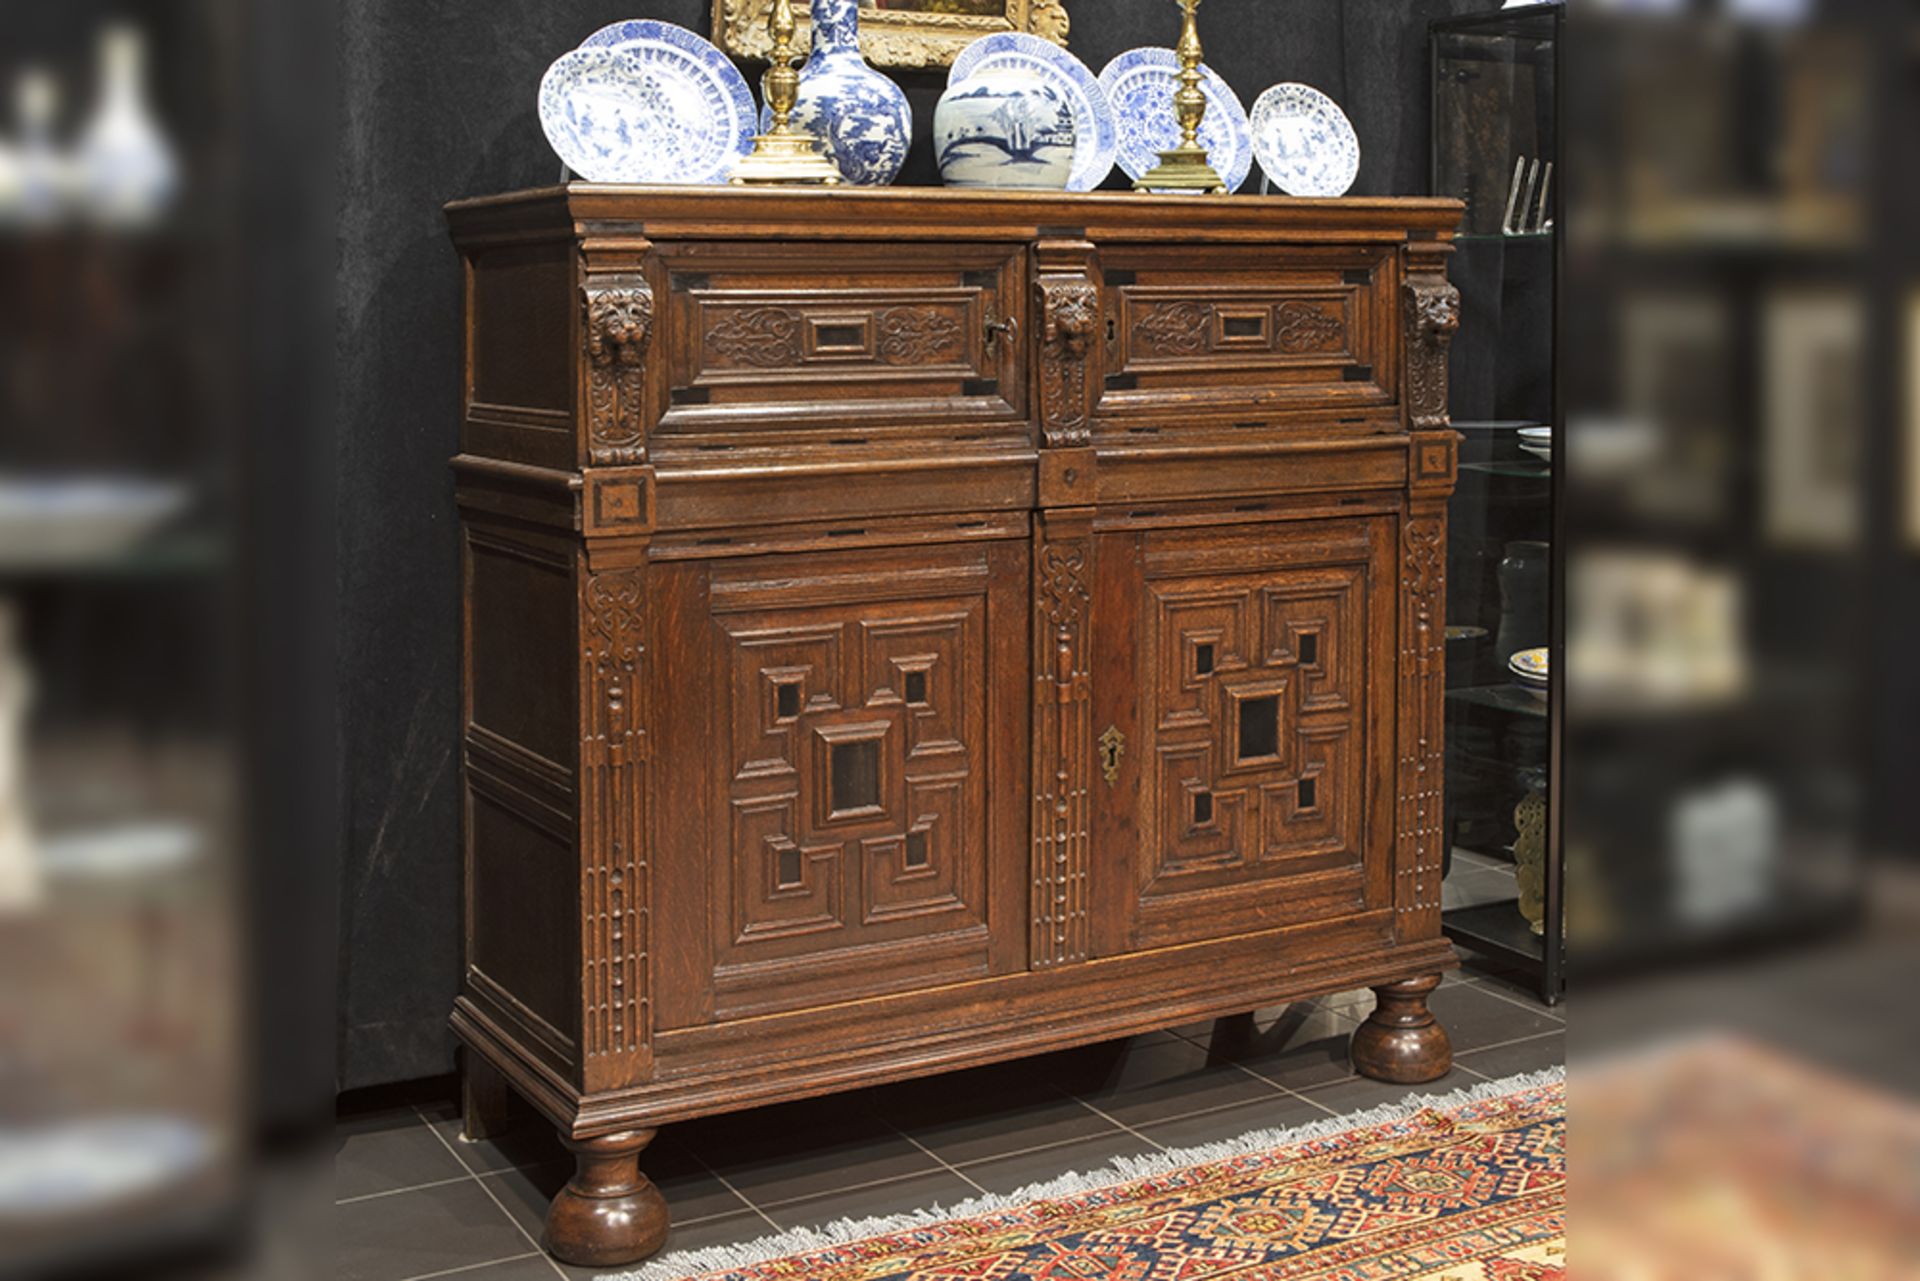 17th Cent. Flemish Renaissance style cupboard in oak and ebony || Zeventiende eeuws Vlaams